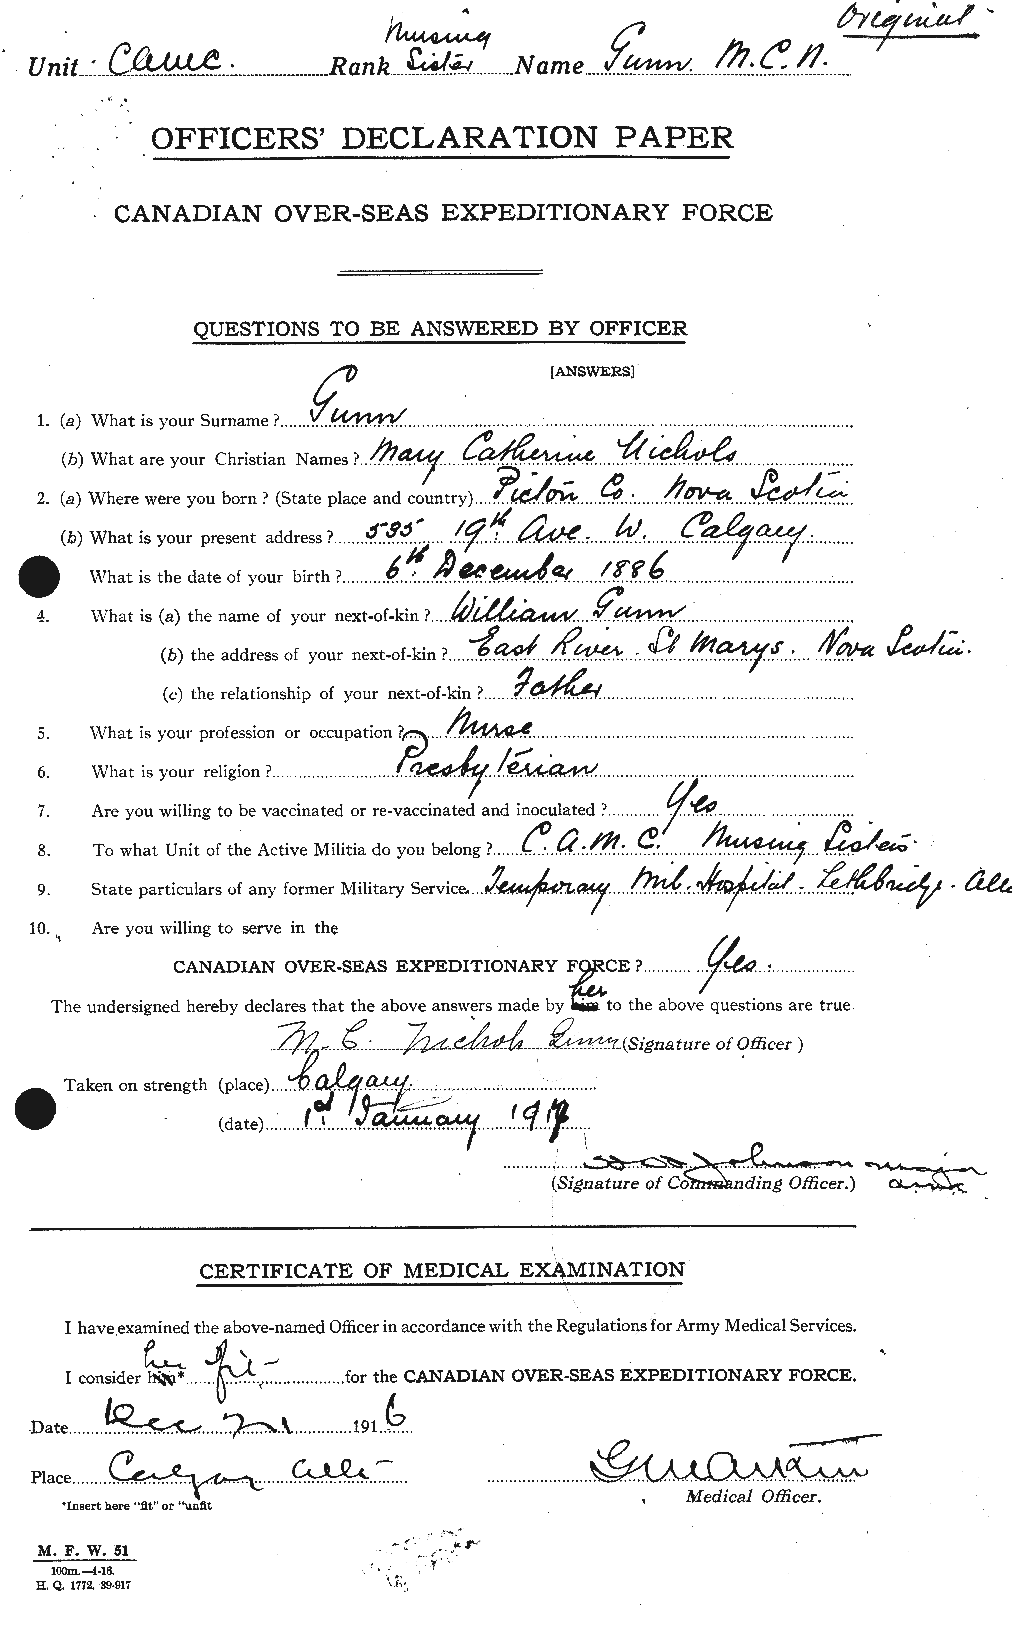 Personnel Records of the First World War - CEF 369312a